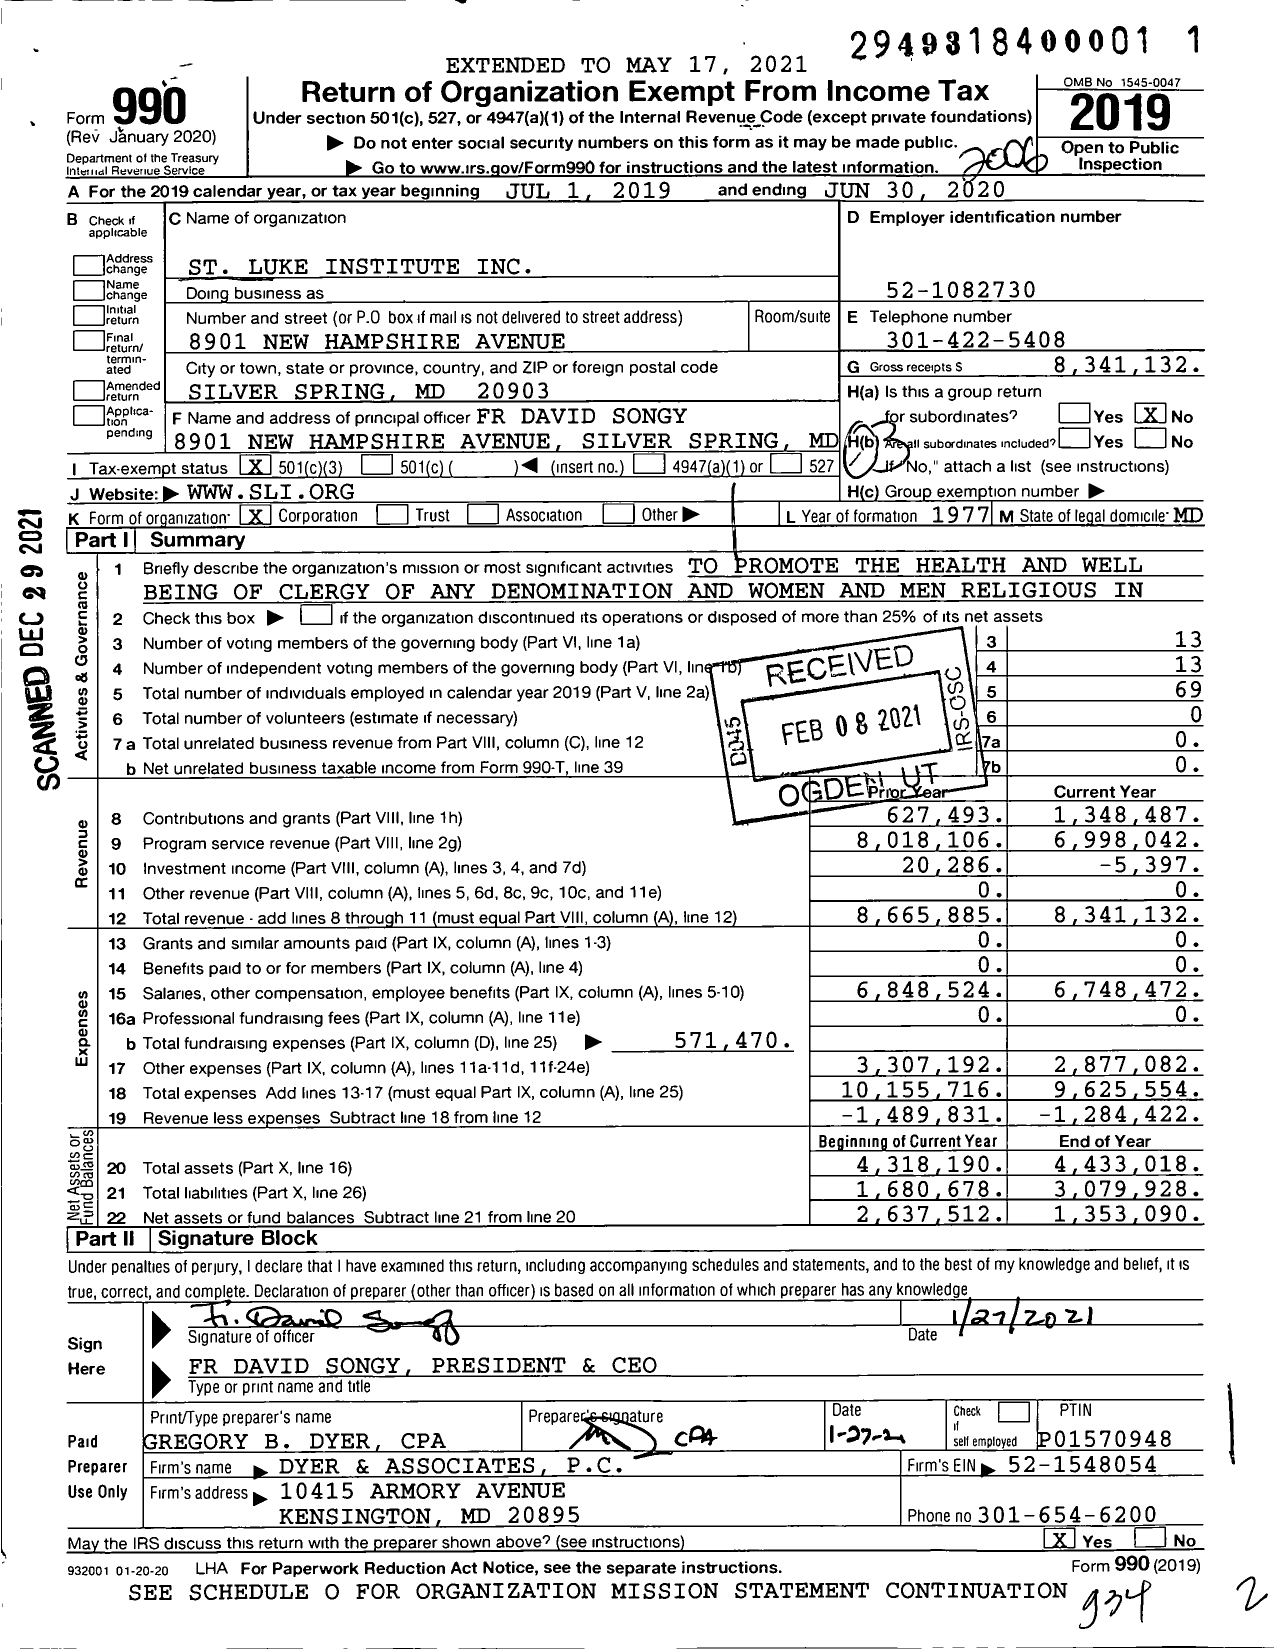 Image of first page of 2019 Form 990 for Saint Luke Institute (SLI)